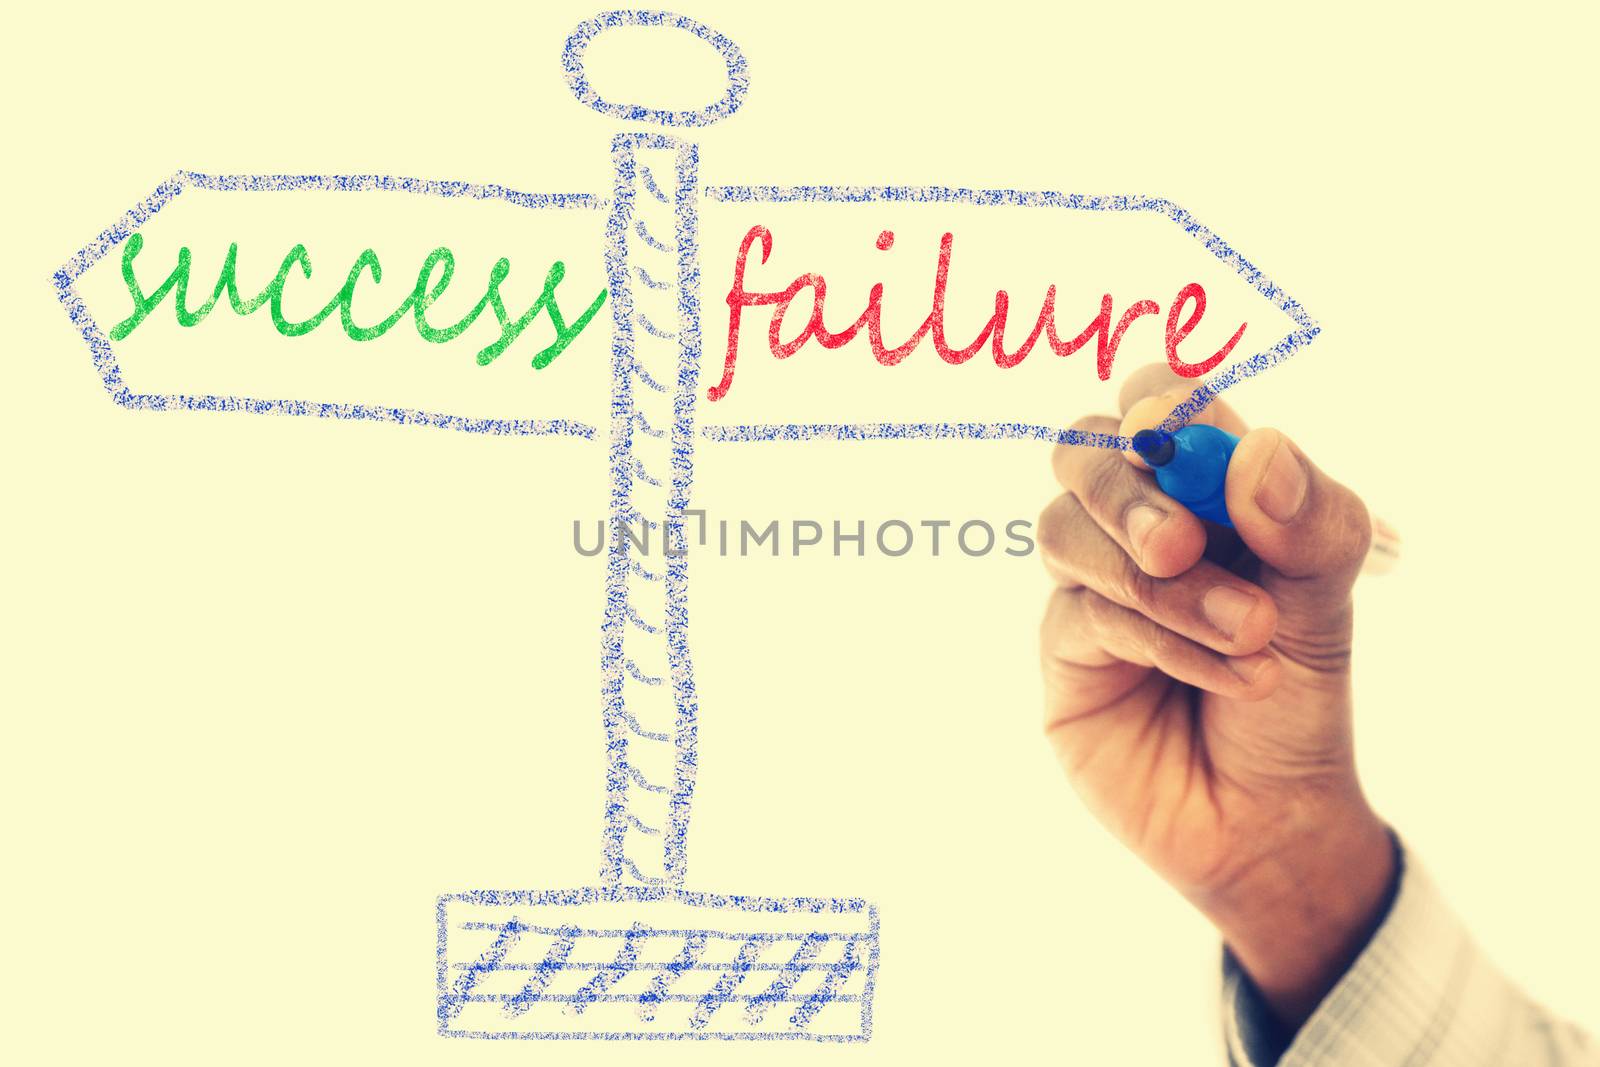 Street signpost success or failure drawing on transparent wipe board